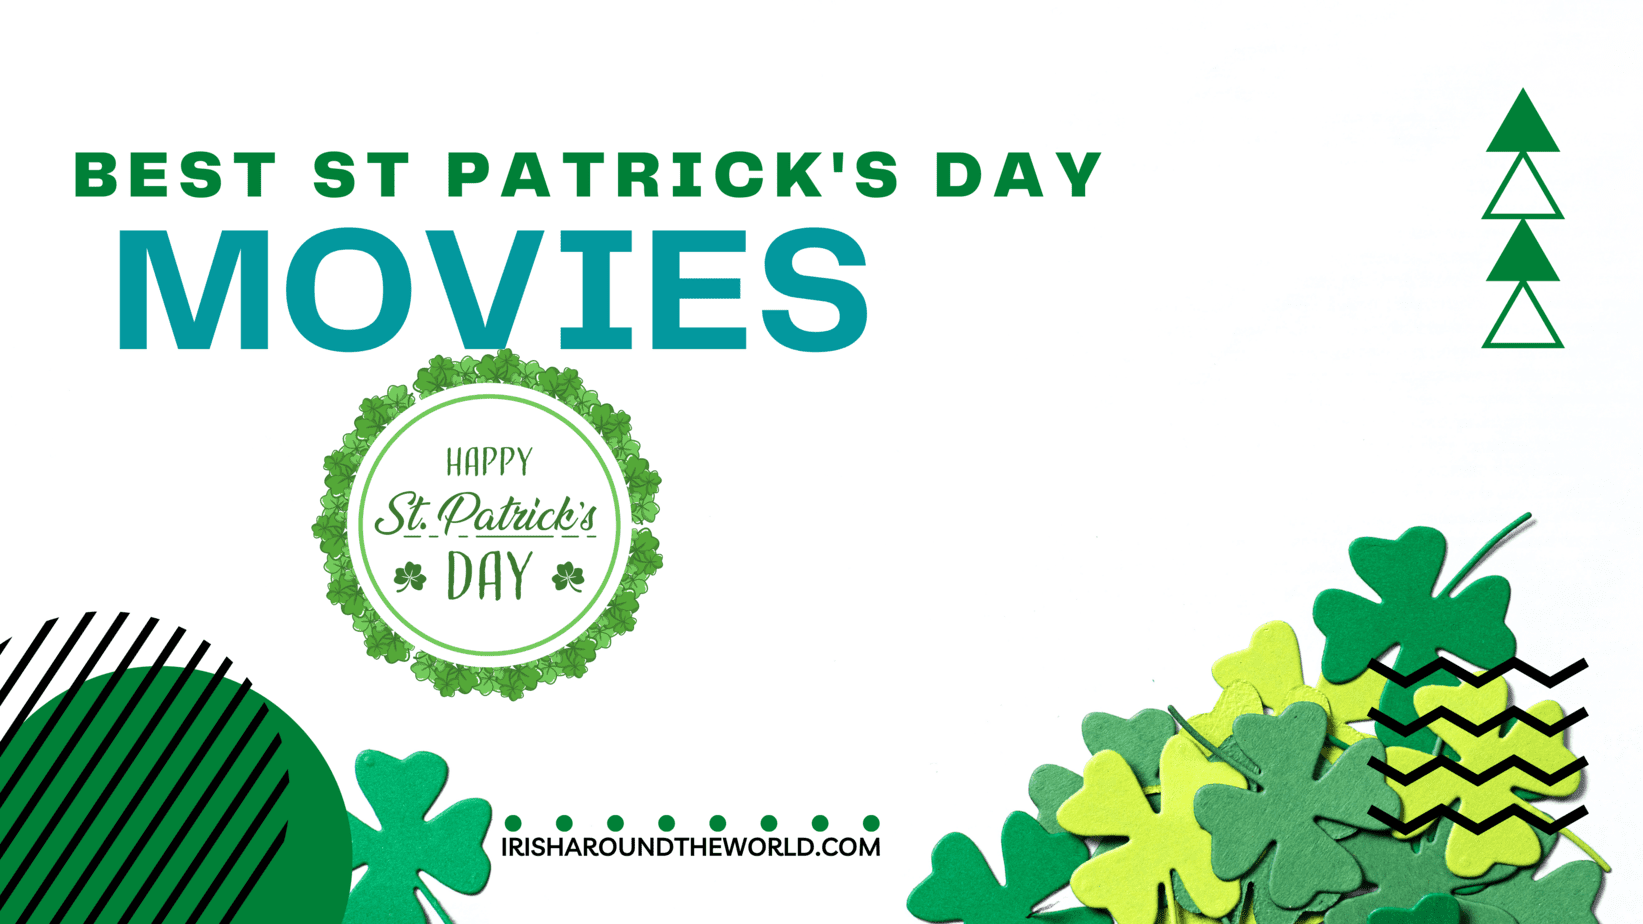 Best St Patrick's Day Movies 2022